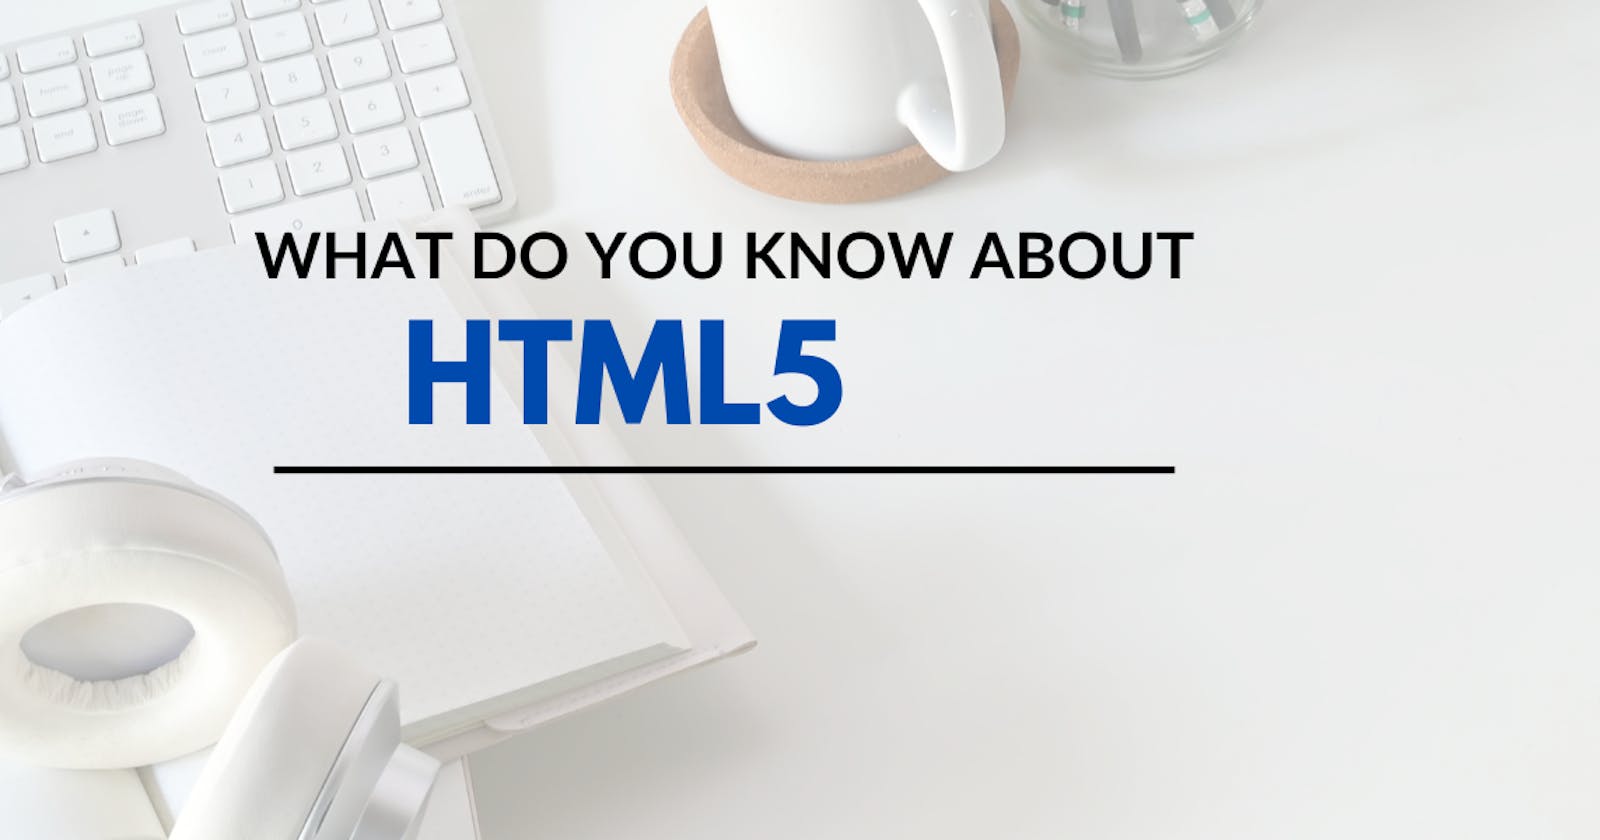 What do you know about HTML5?